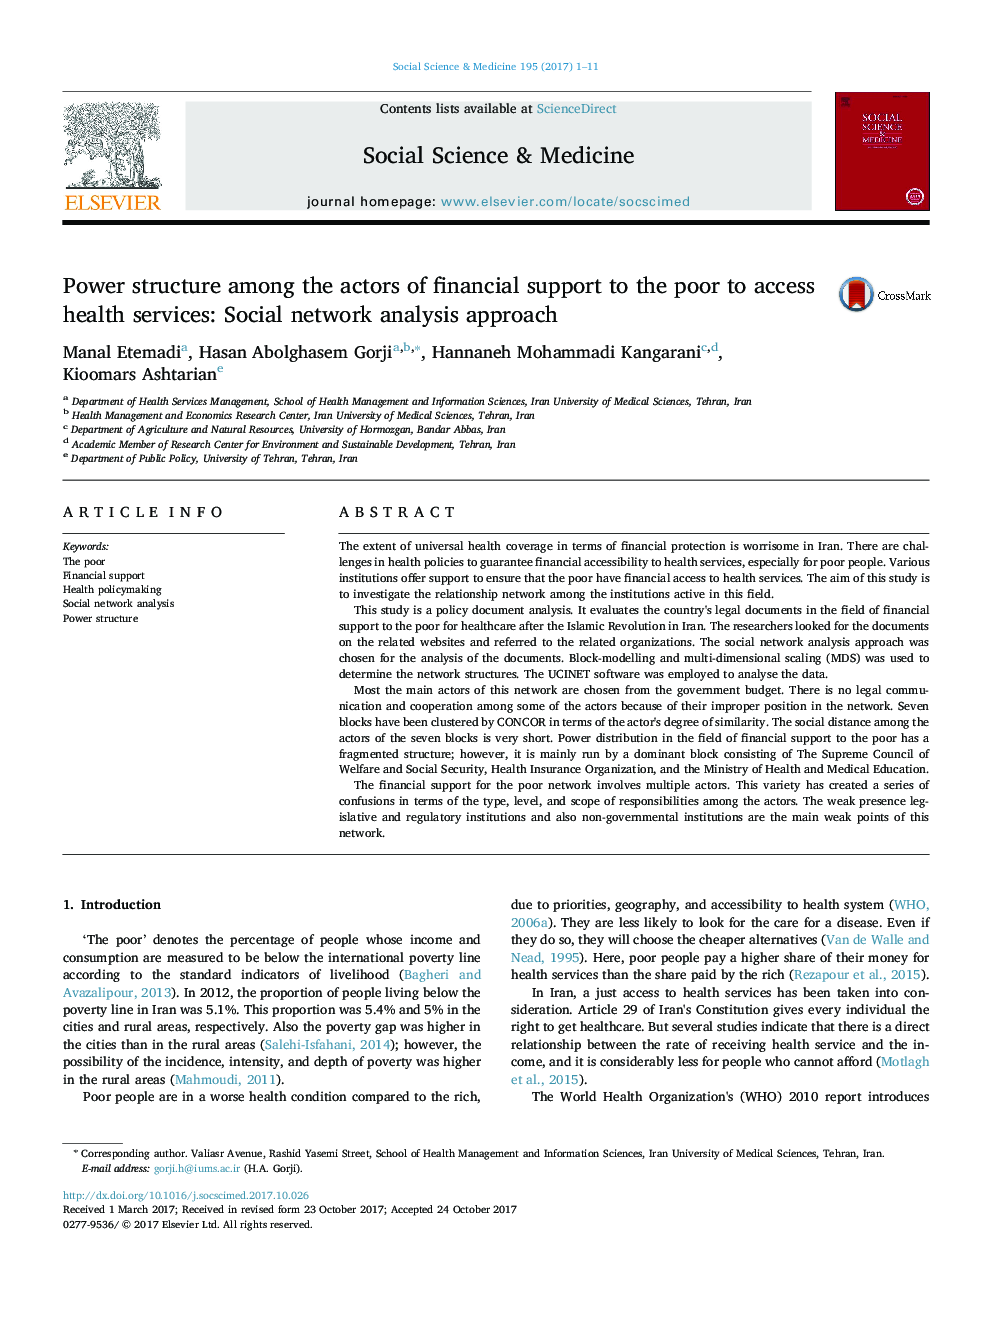 Power structure among the actors of financial support to the poor to access health services: Social network analysis approach